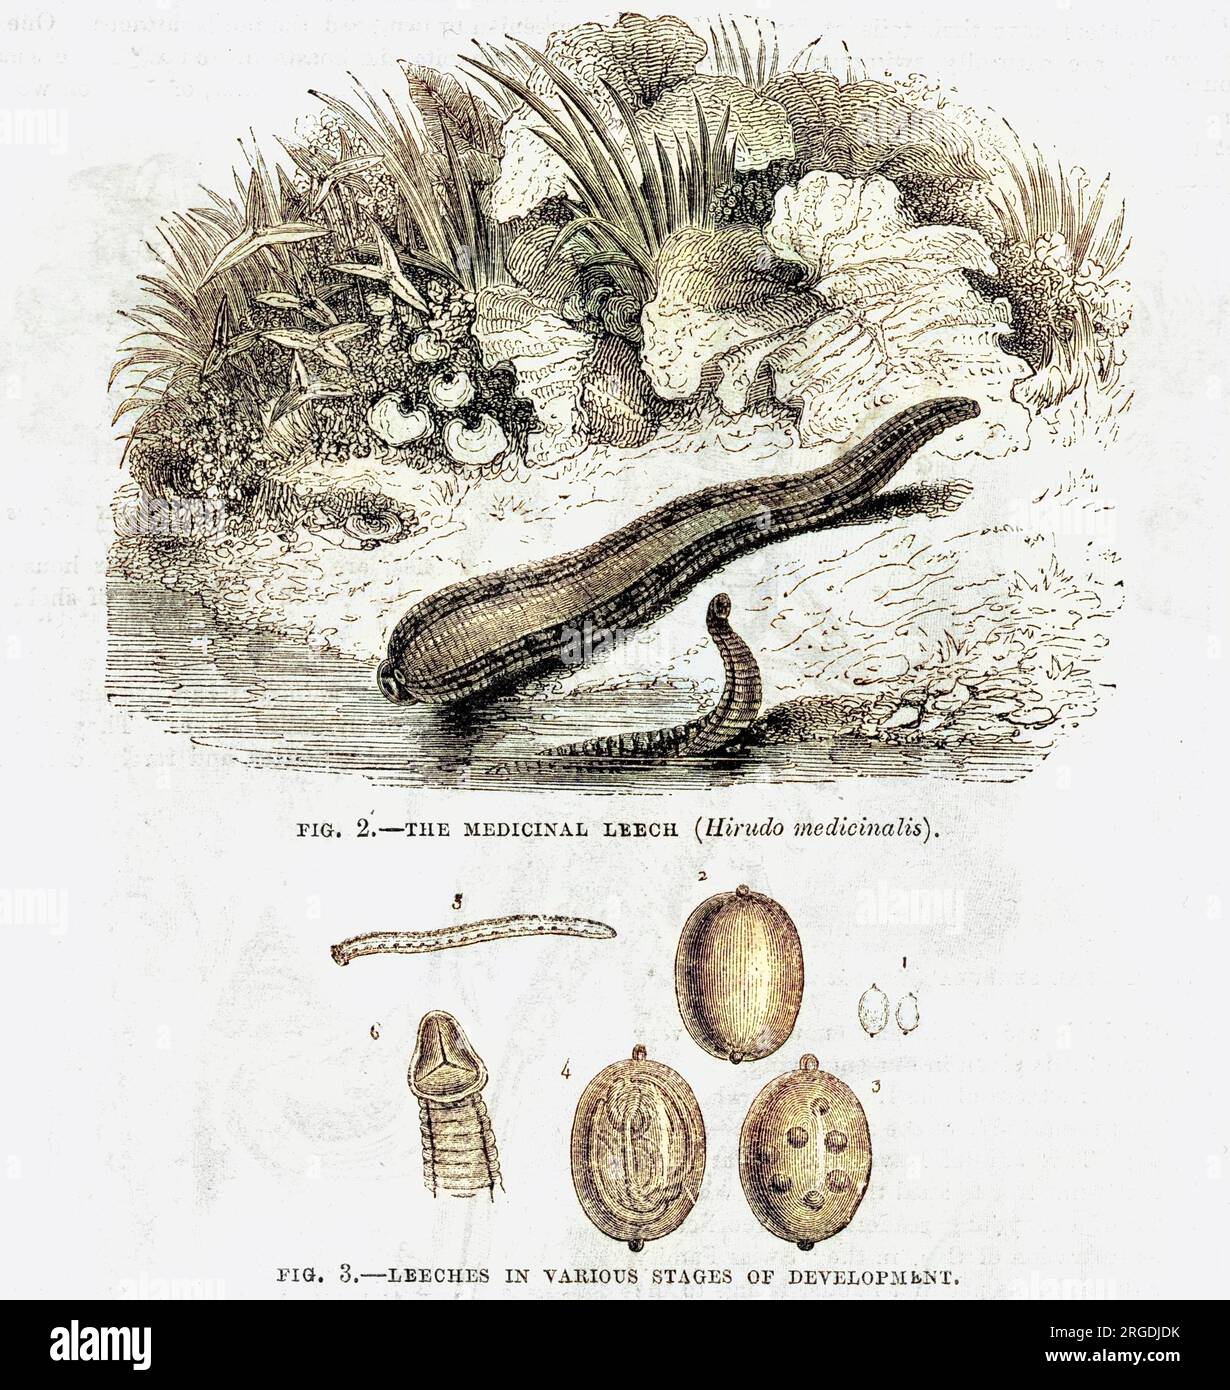 Two medicinal leeches(Hirodu medicinalis)in their natural habitat, and a diagram showing leeches in various stages of development. Stock Photo